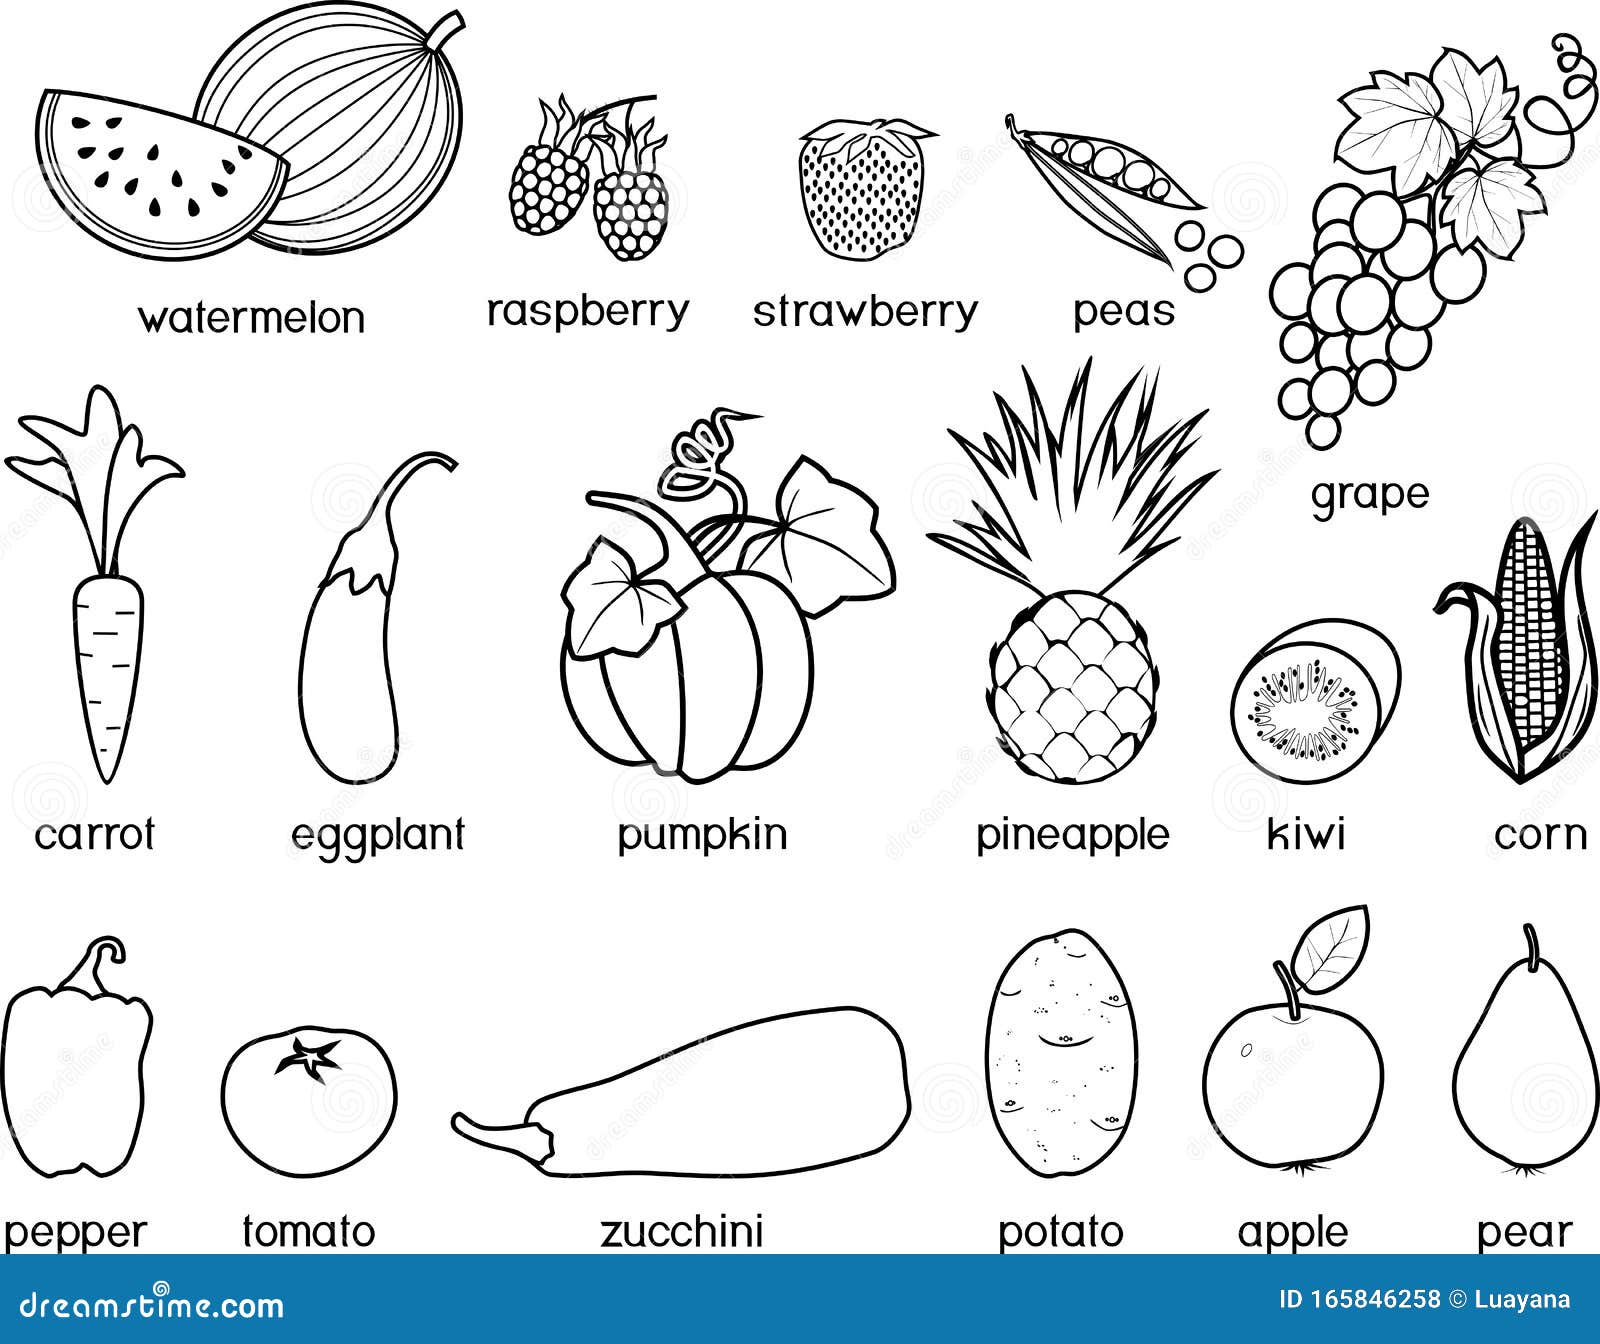 Coloring page big set of different fruits and vegetables stock vector